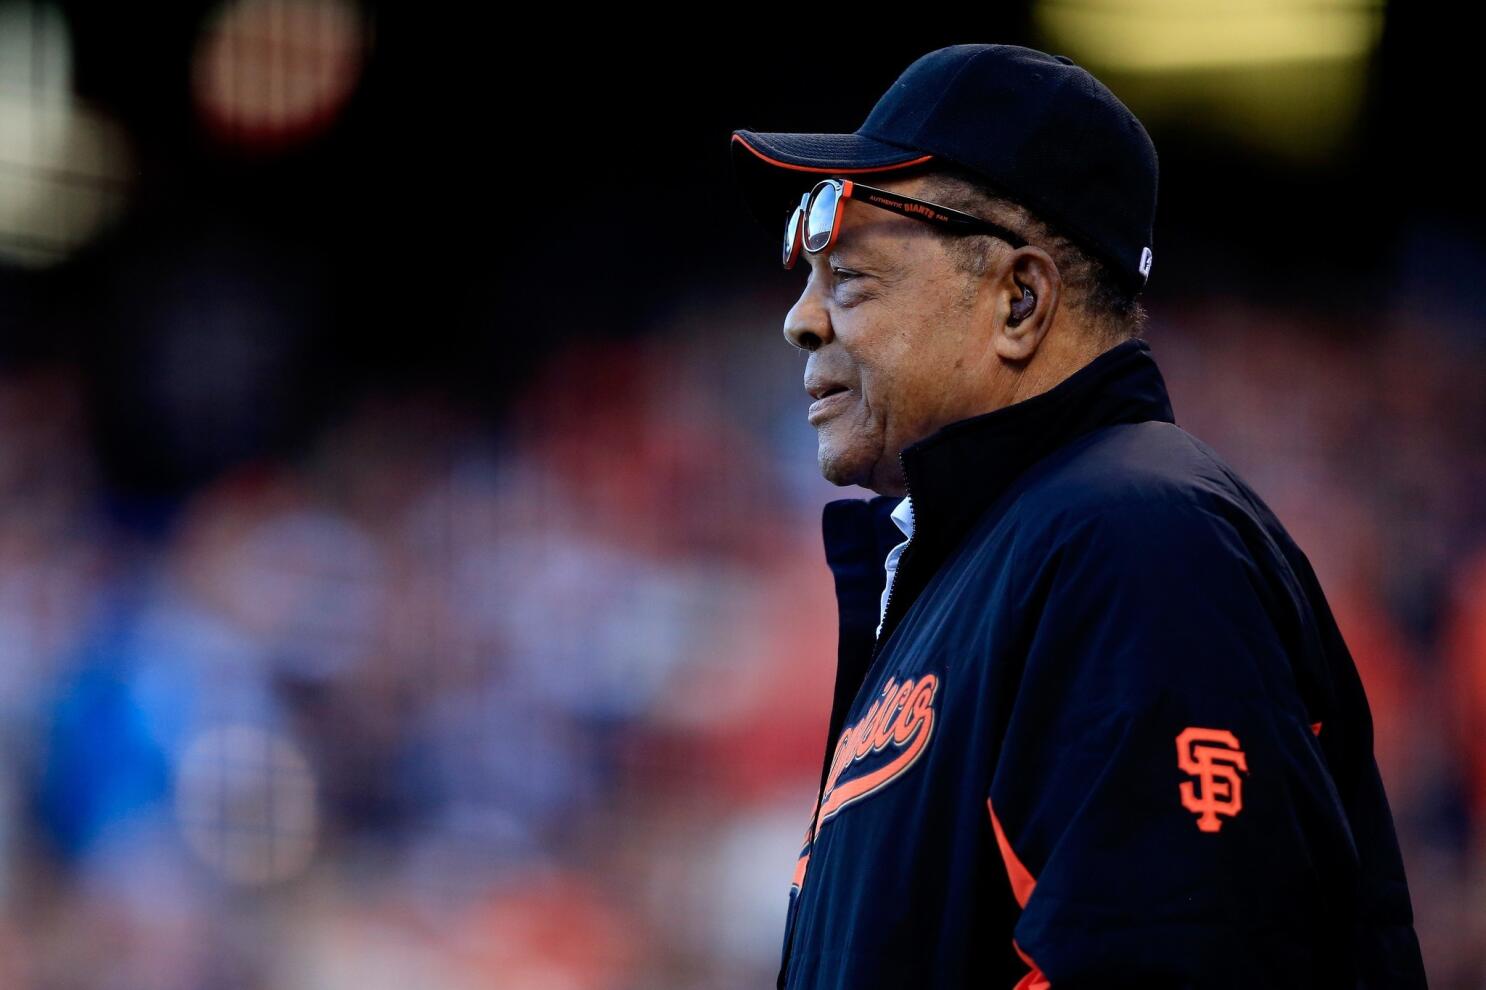 In 2007: Willie Mays steals show at All-Star Game in San Francisco